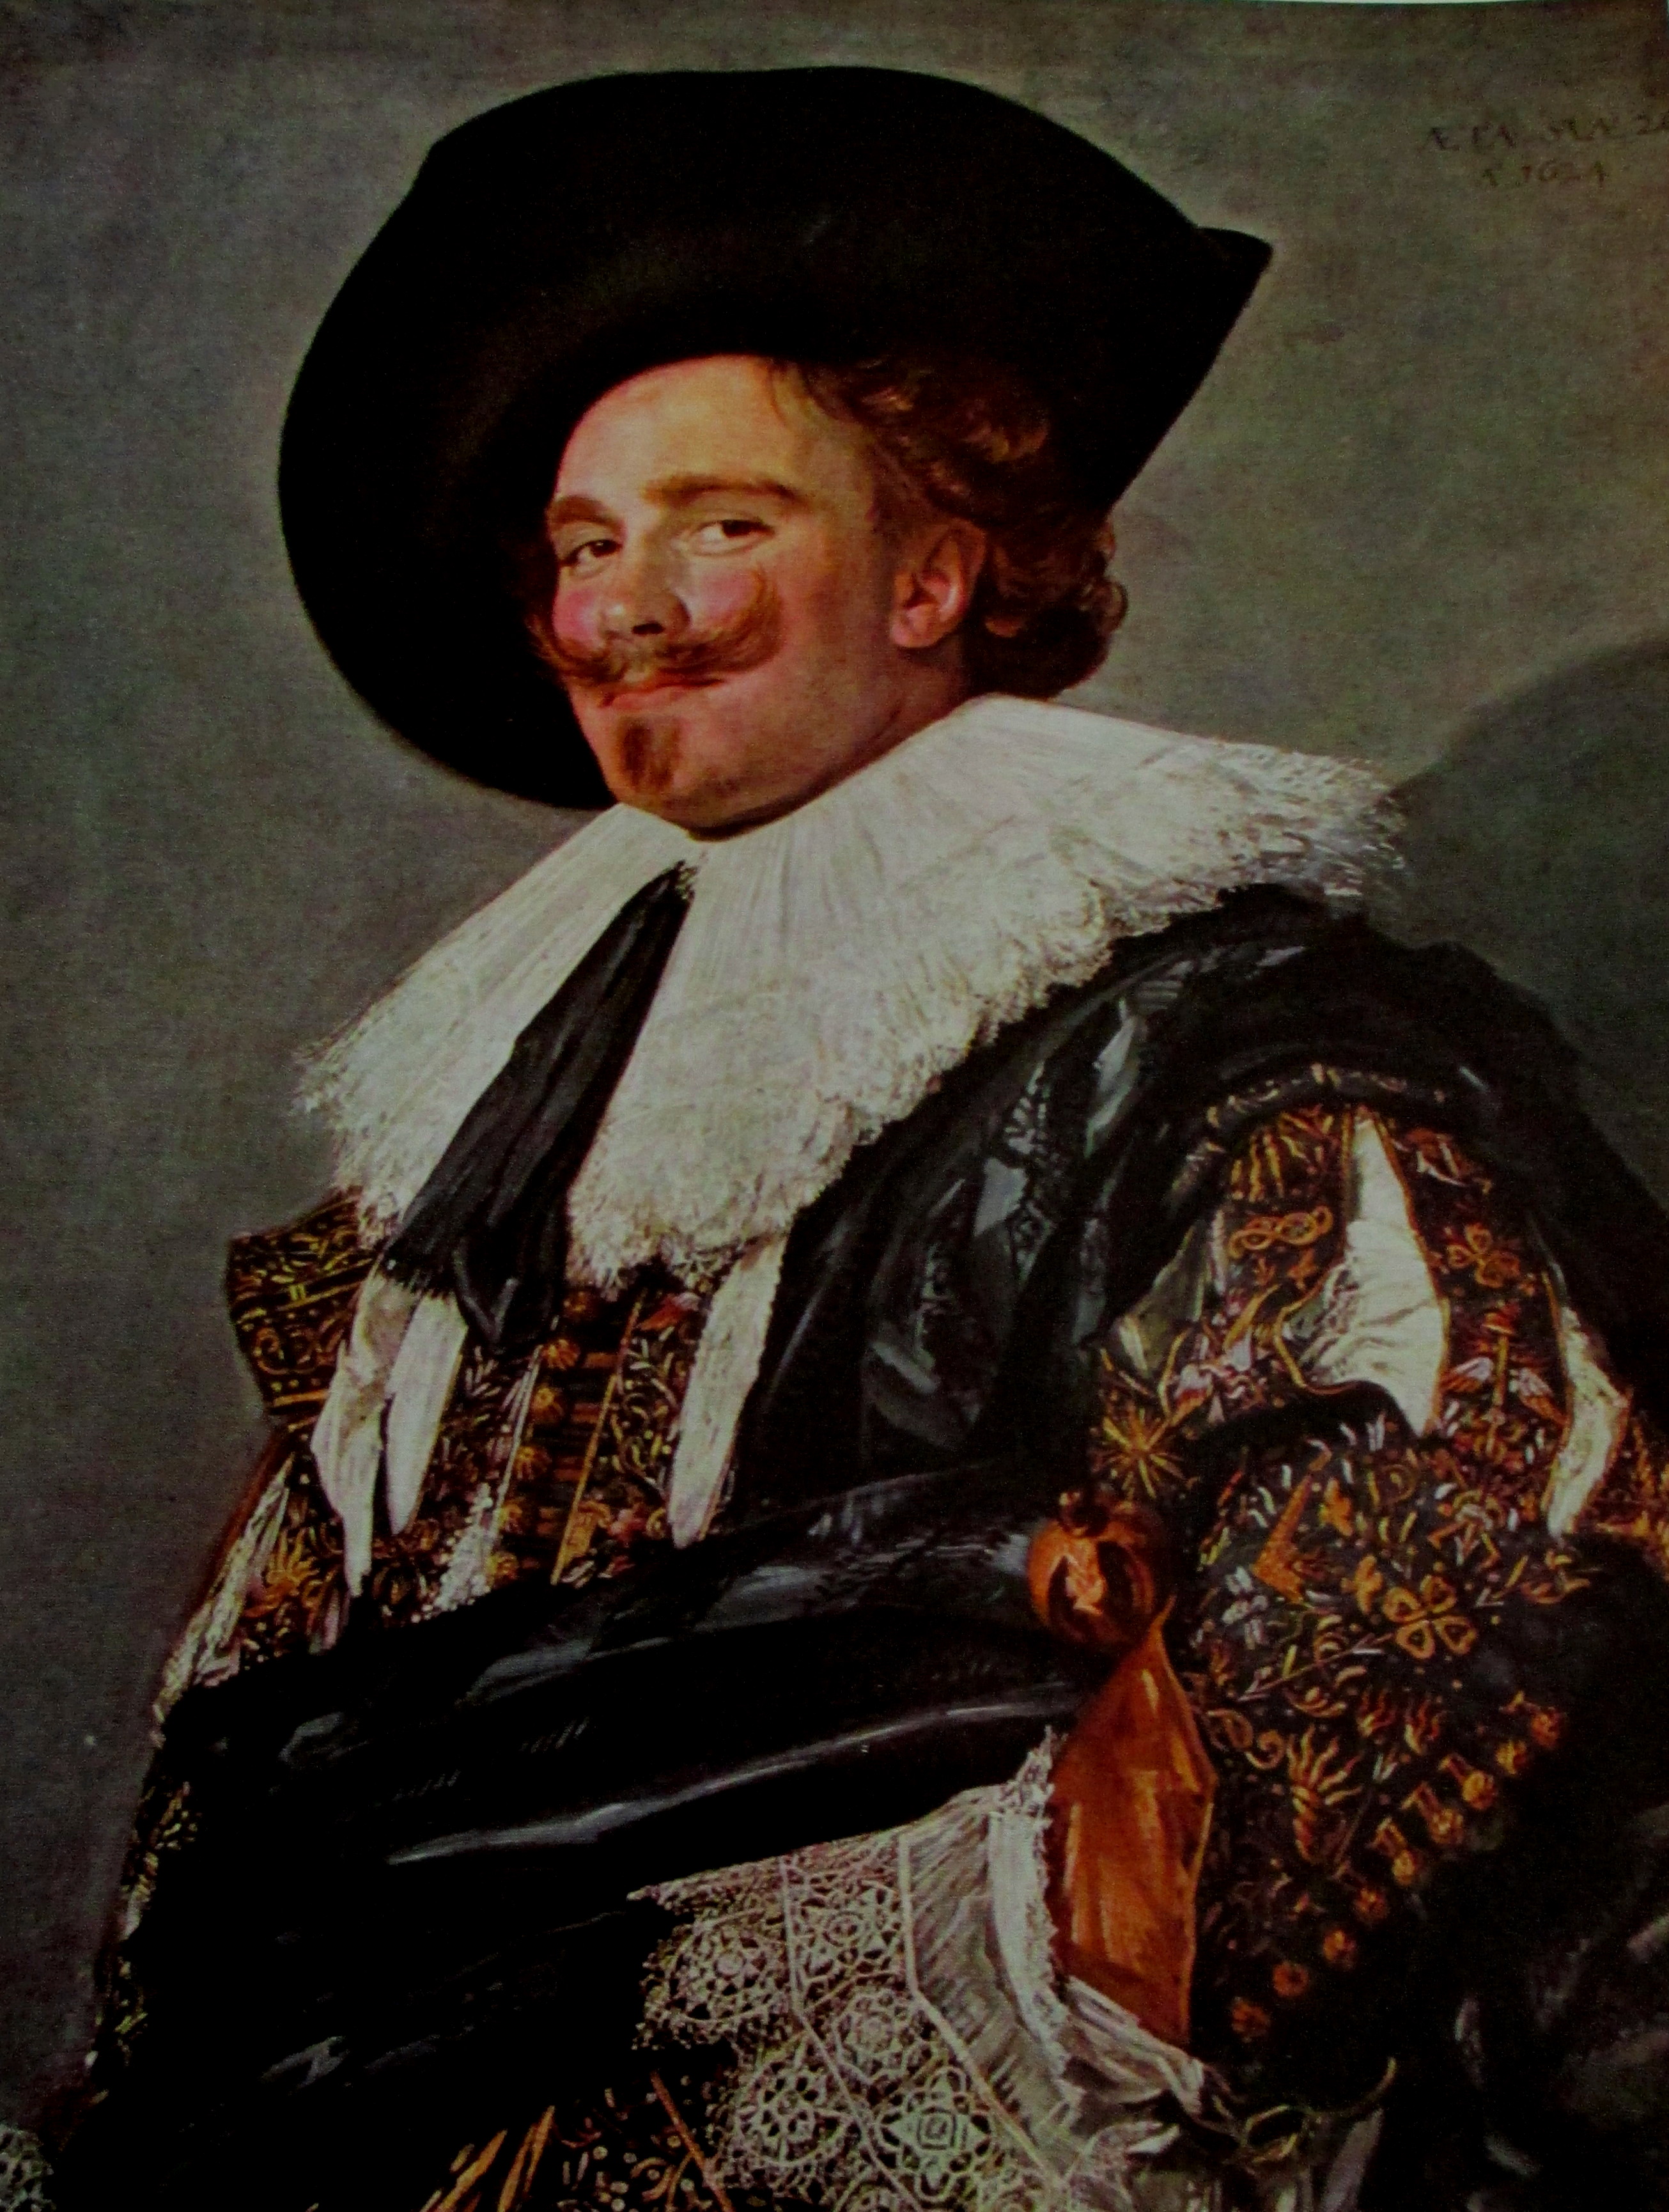 The Laughing Cavalier is a portrait by the Dutch Golden Age painter Frans Hals in the Wallace Collection in London, 1624